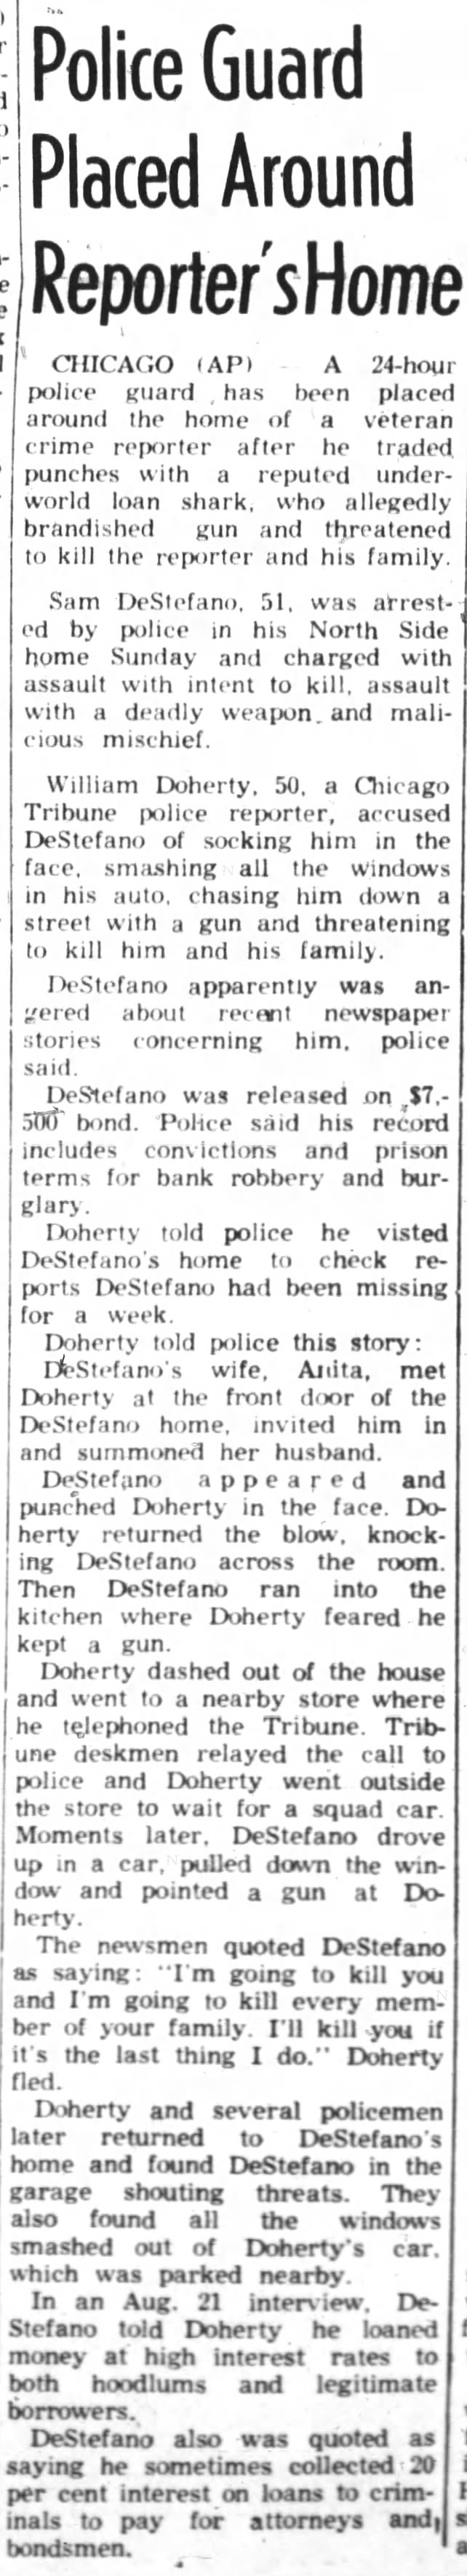 Sam DeStefano arrested after fight with reporter, threatens his family (1961)